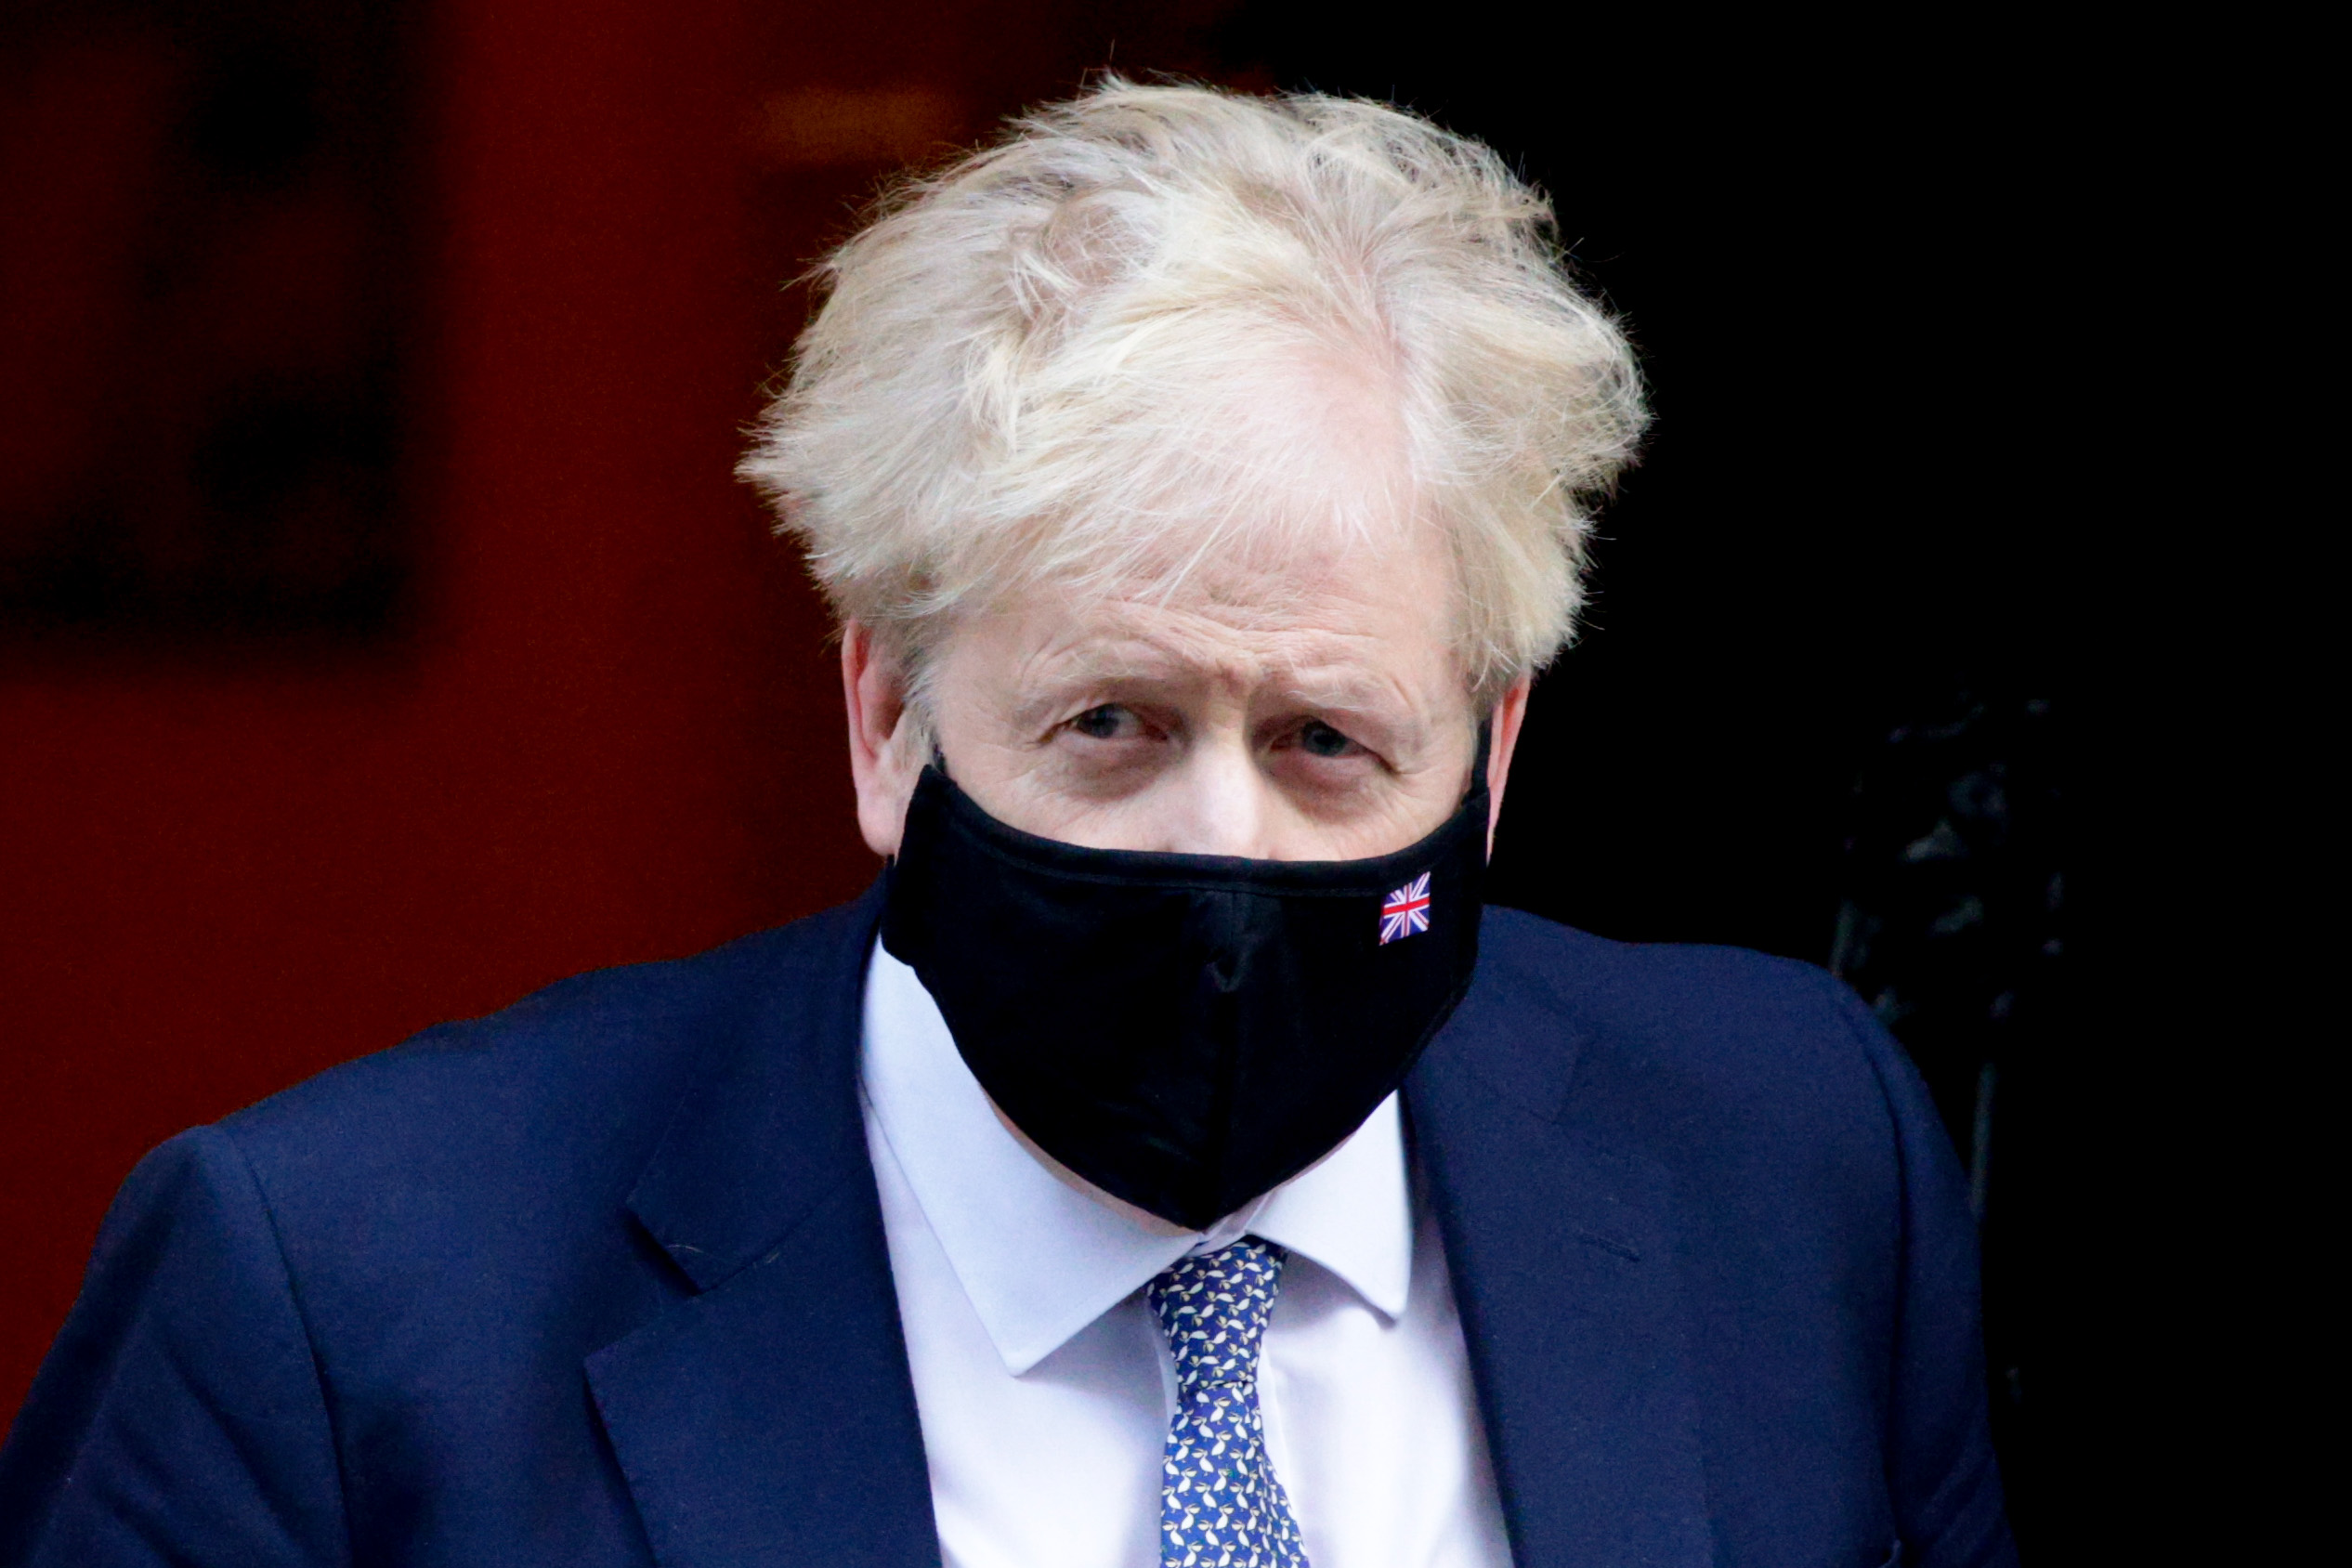 British Prime Minister Boris Johnson leaves 10 Downing Street for his weekly Prime Minister's Questions (PMQs) appearance in the House of Commons in London, England, on January 12, 2022.